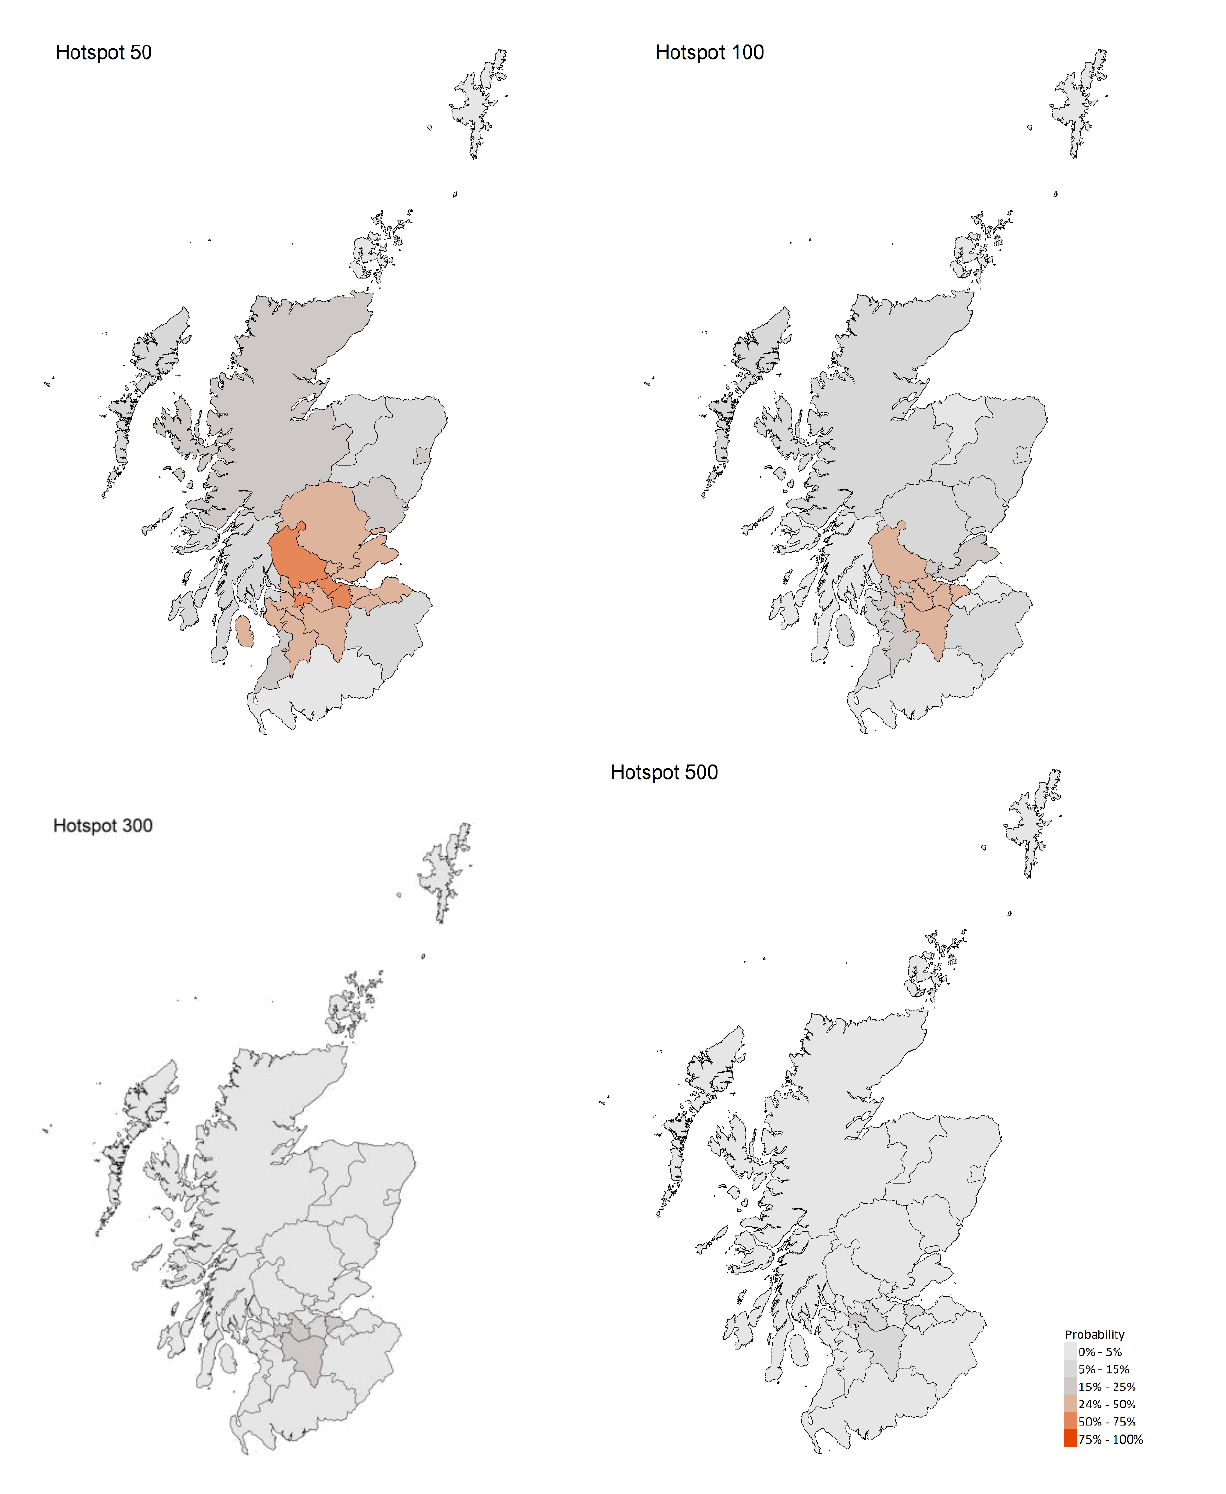 Figure 12. A series of maps showing the probability of local authority areas having more than 50, 100, 300 or 500 cases per 100K (21 - 27 March 21)